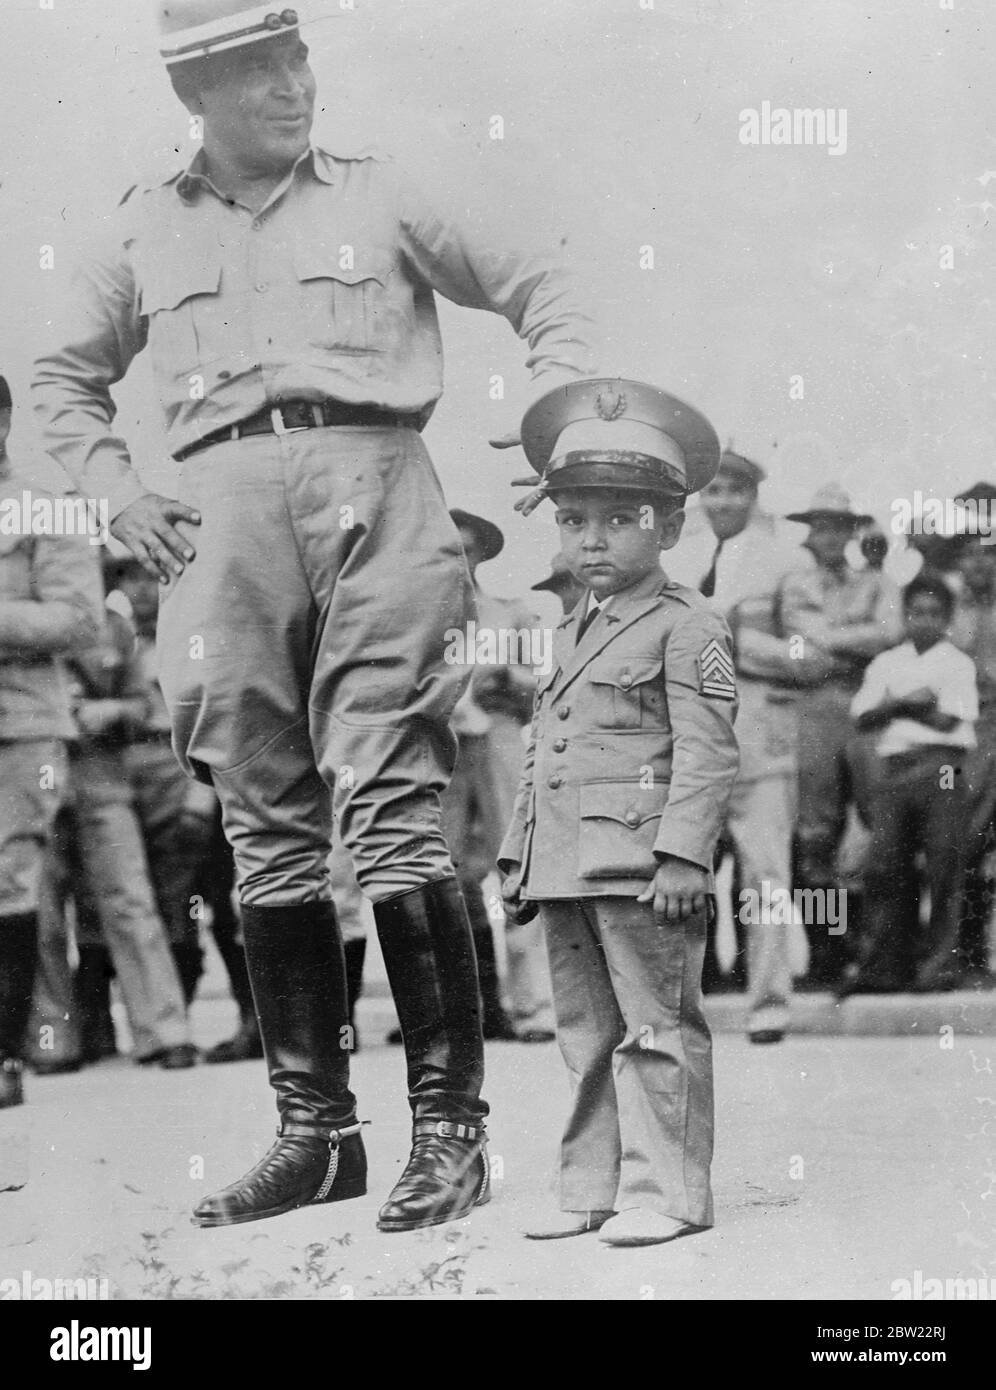 The three-year-old son of Colonel Fulgencio Batista, the Cuban dictator, dressed in the miniature of the Sergeants uniform worn by his father on the occasion of the Cuban Revolution of 1933, when he attended celebrations in Havana in connection with the fourth anniversary of the revolution 8 September 1937. Stock Photo